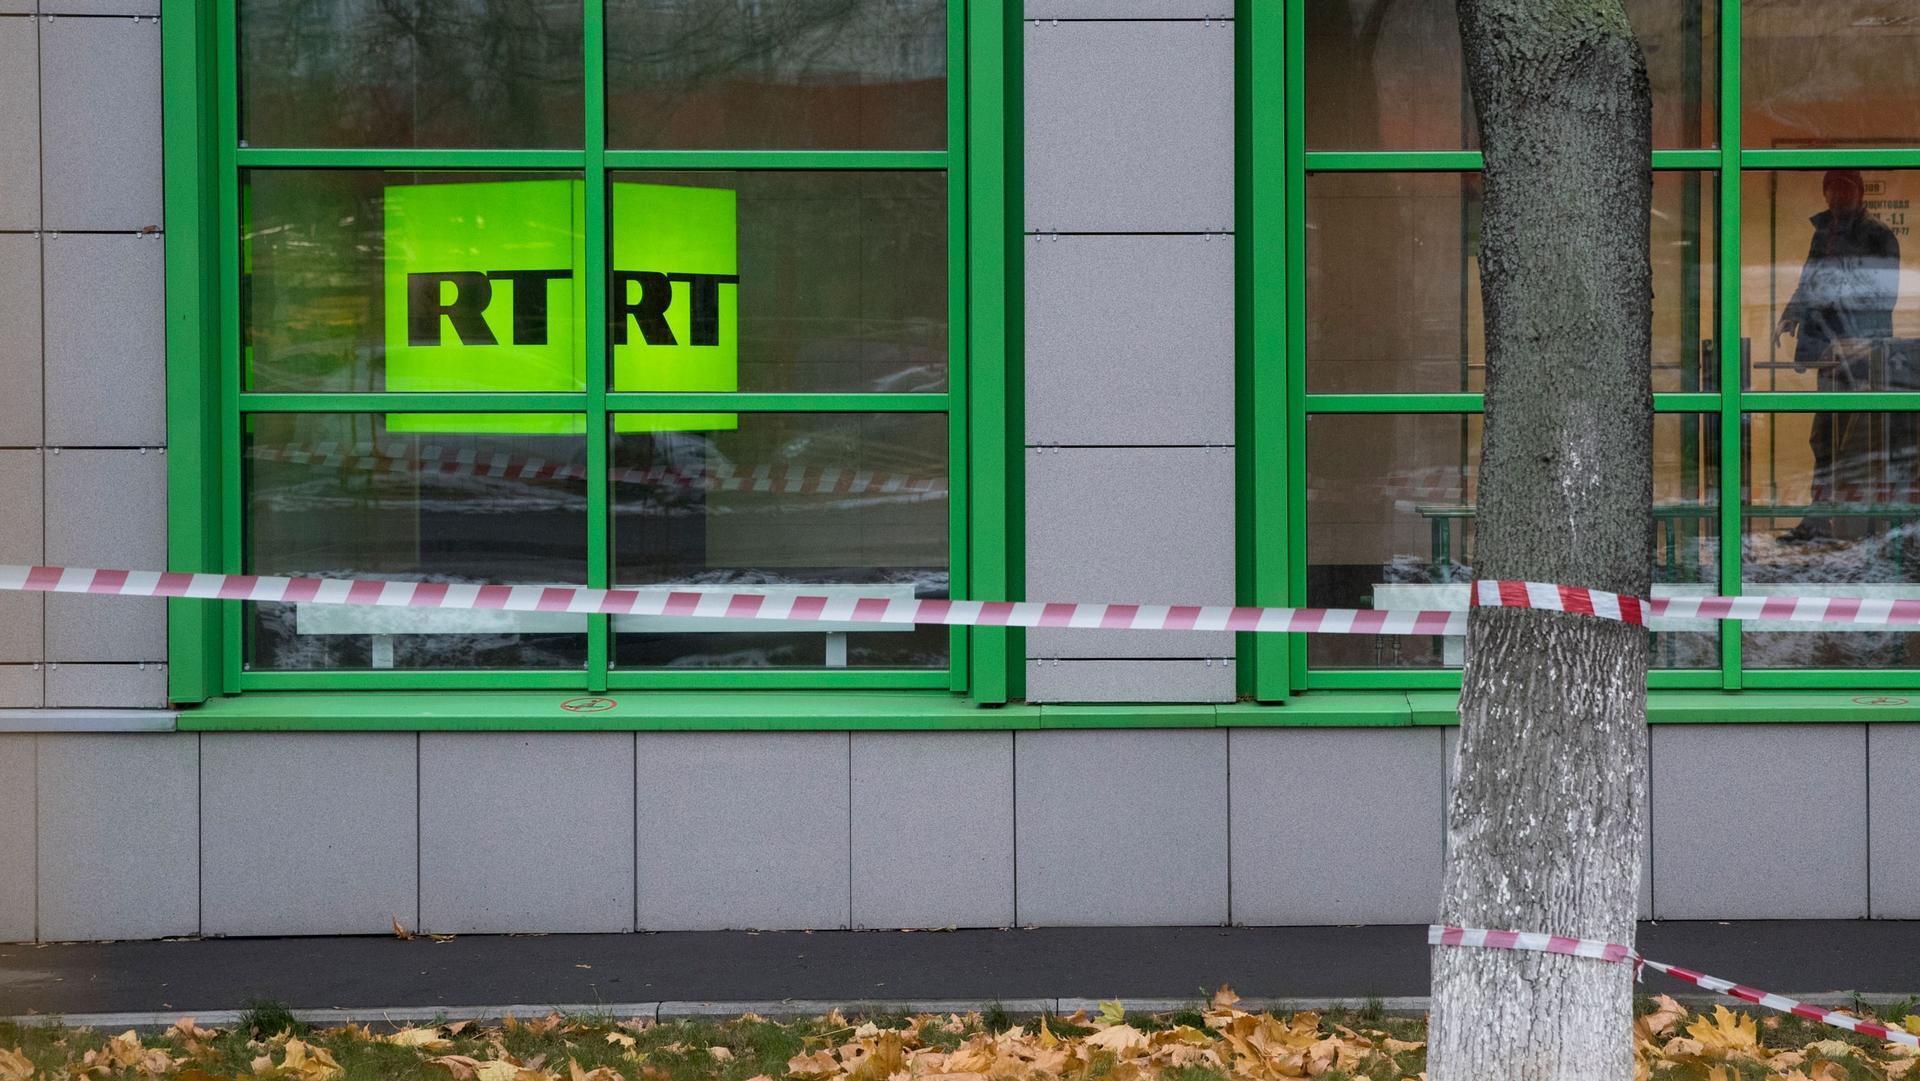 Russian state-owned television station RT logo is seen through a window with caution tape in front of a building